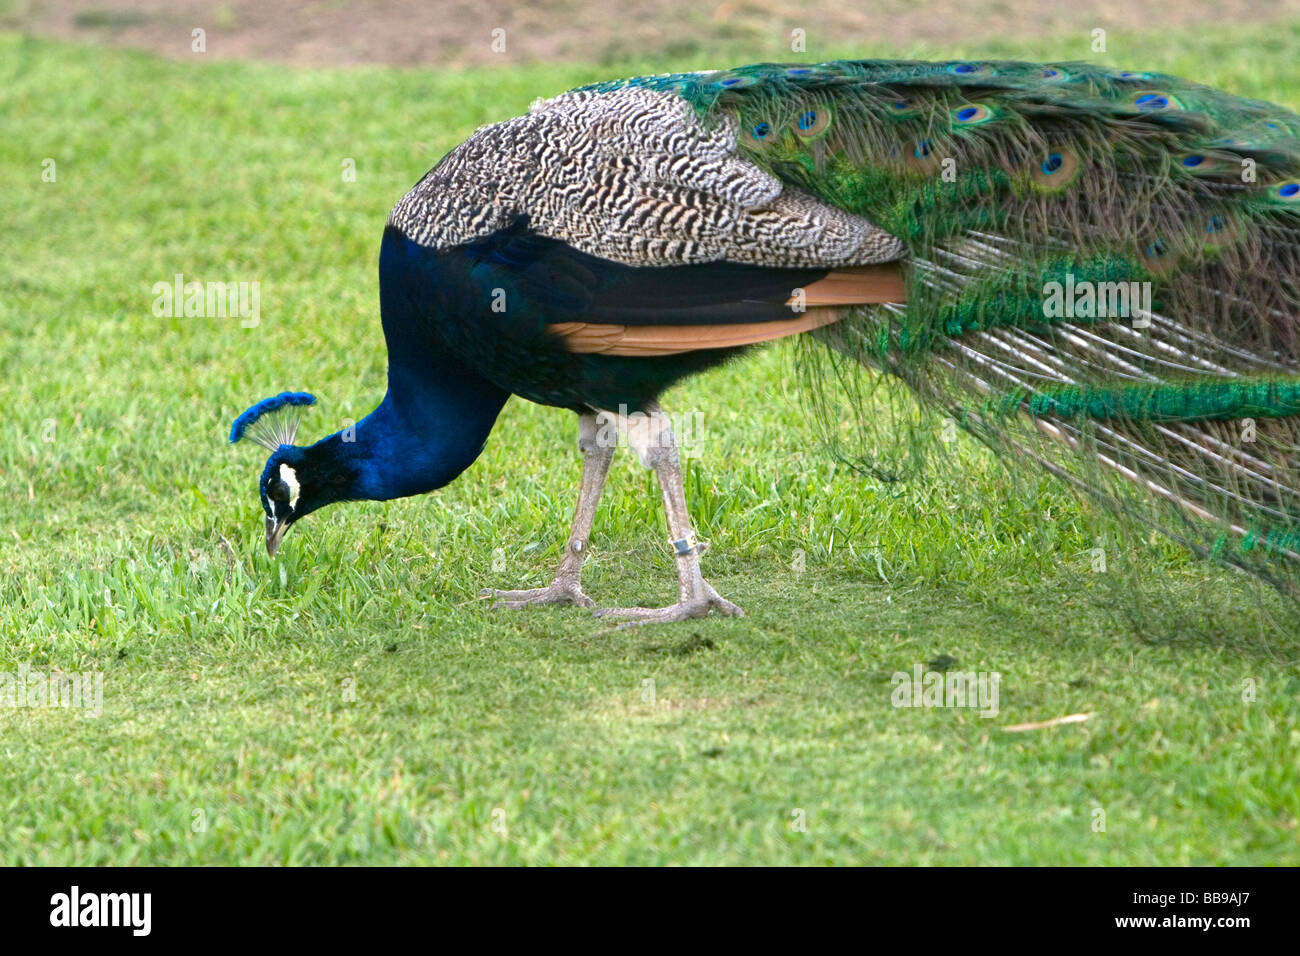 Indian Blue Peacock at the Los Angeles County Arboretum and Botanical Garden in Arcadia California USA  Stock Photo